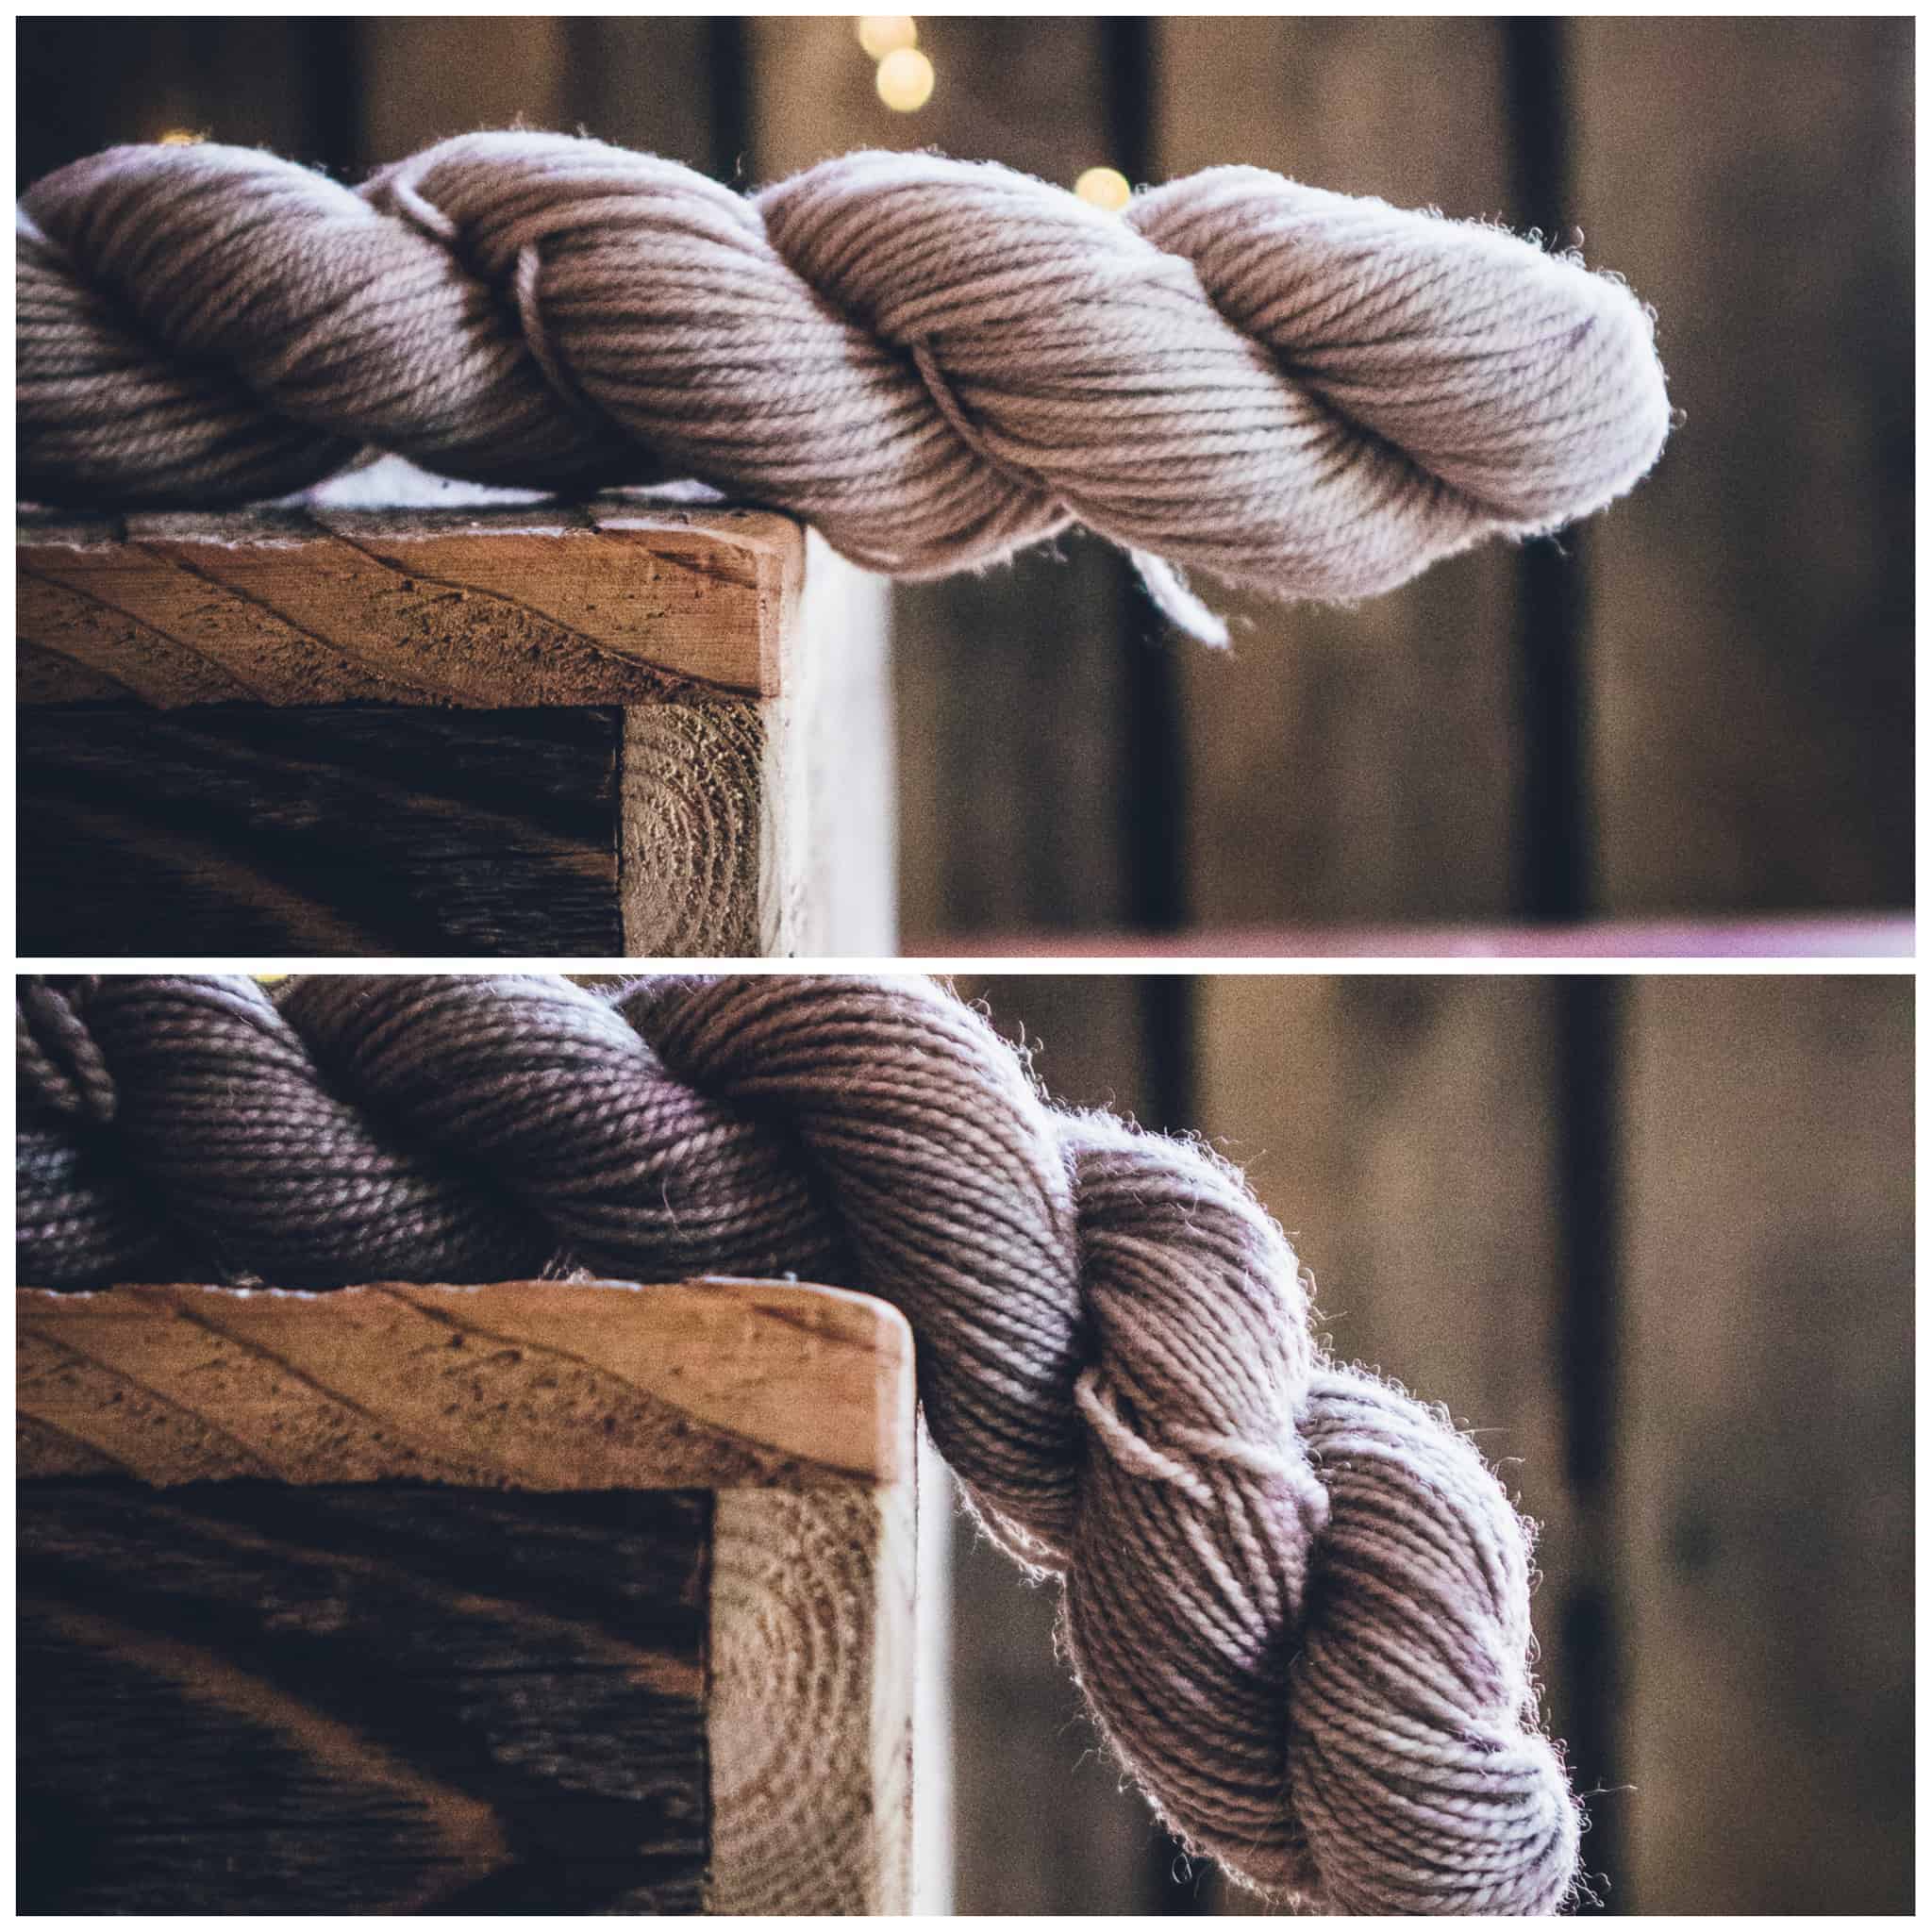 Two photos of gray yarn, with the bottom one curling over the edge of a table.